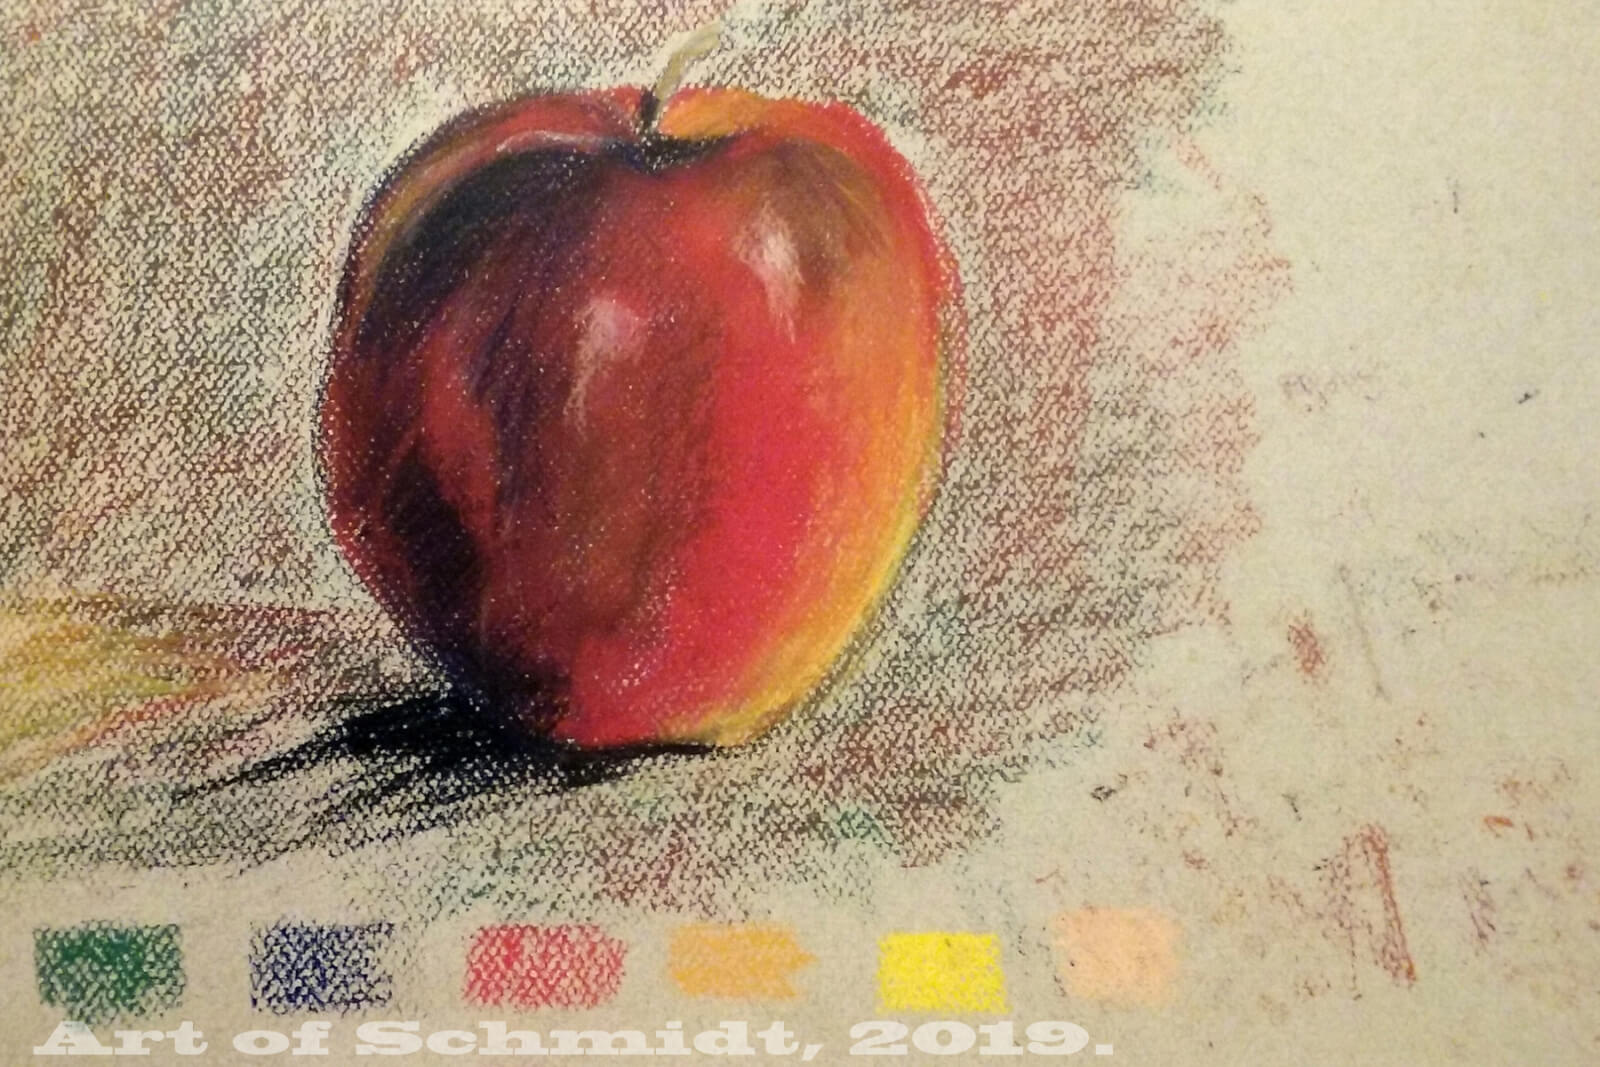 How To Begin Painting With Soft Pastels?, by Sketch Stack